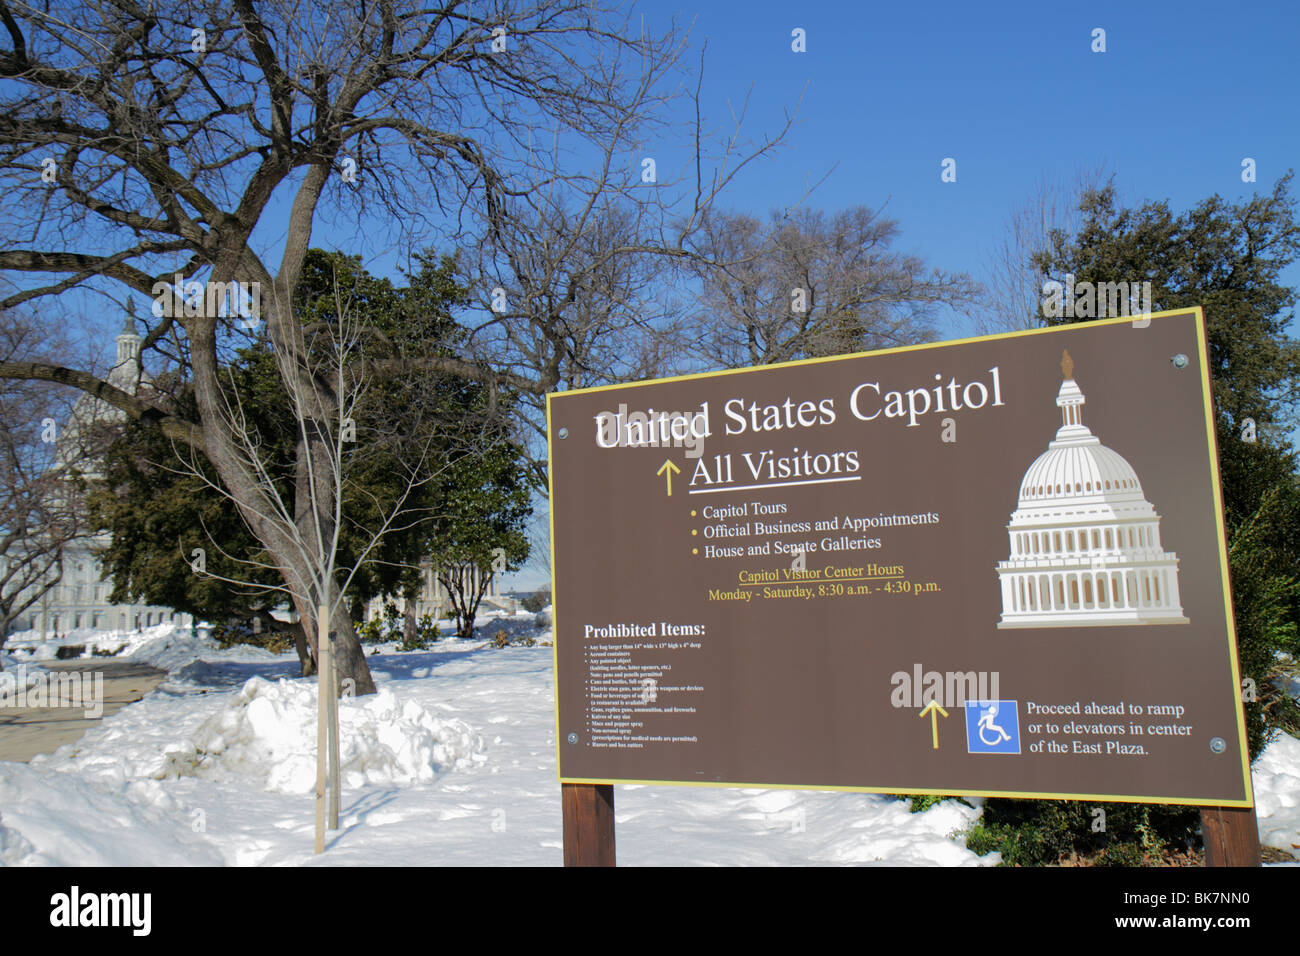 Washington DC,United States US Capitol,visitor center,tours,hours,prohibited items,security,sign,winter,snow,dome,government,Congress,DC100218005 Stock Photo